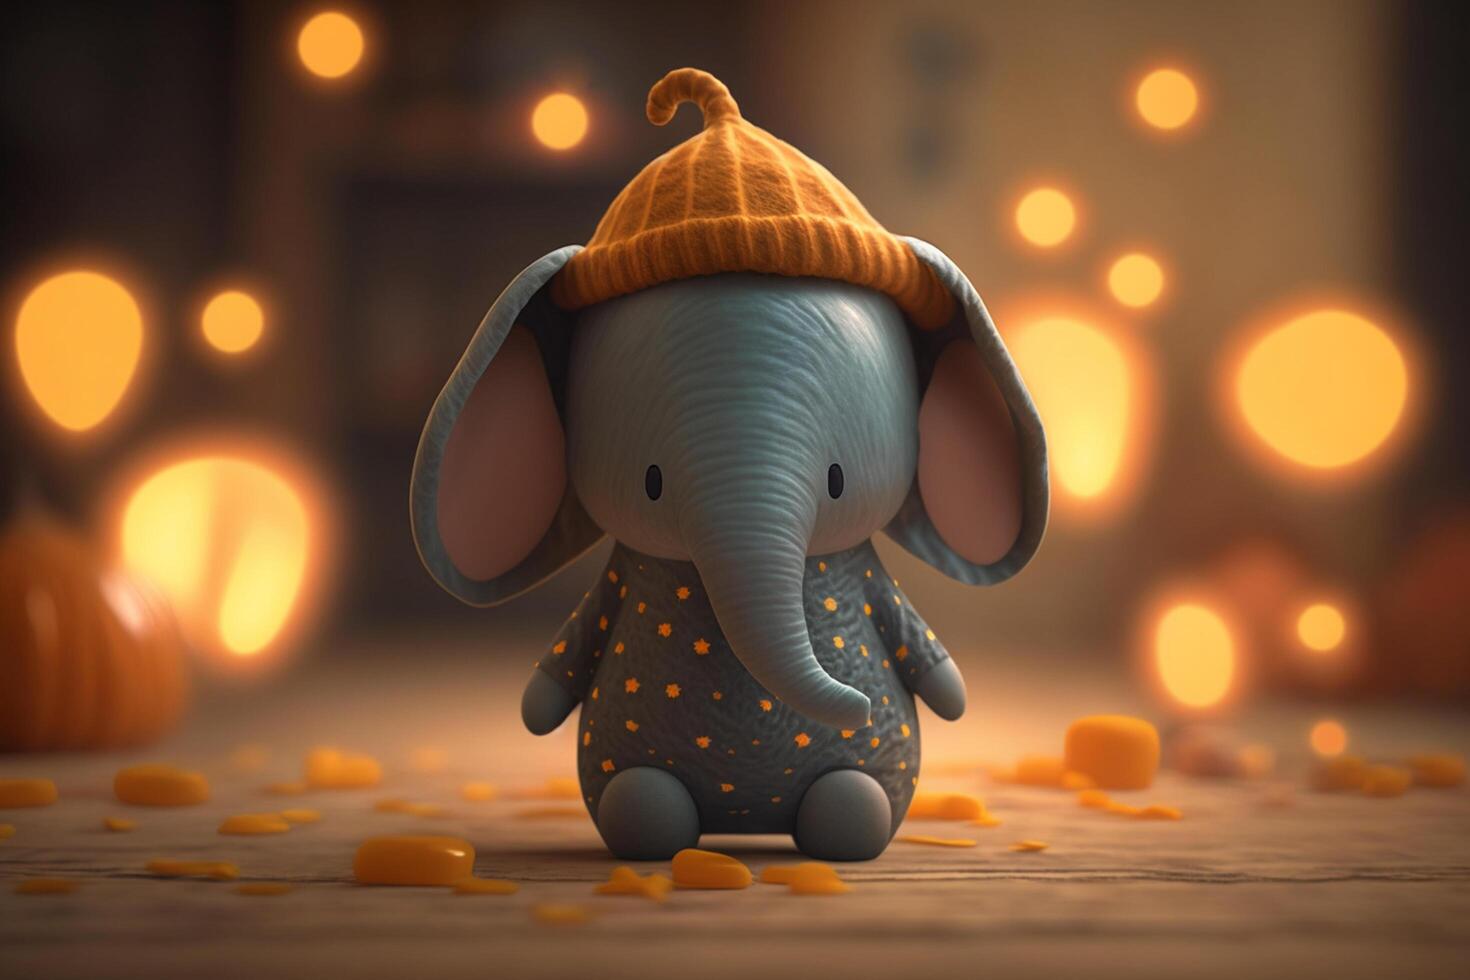 Adorable little elephant in a spooky Halloween costume photo